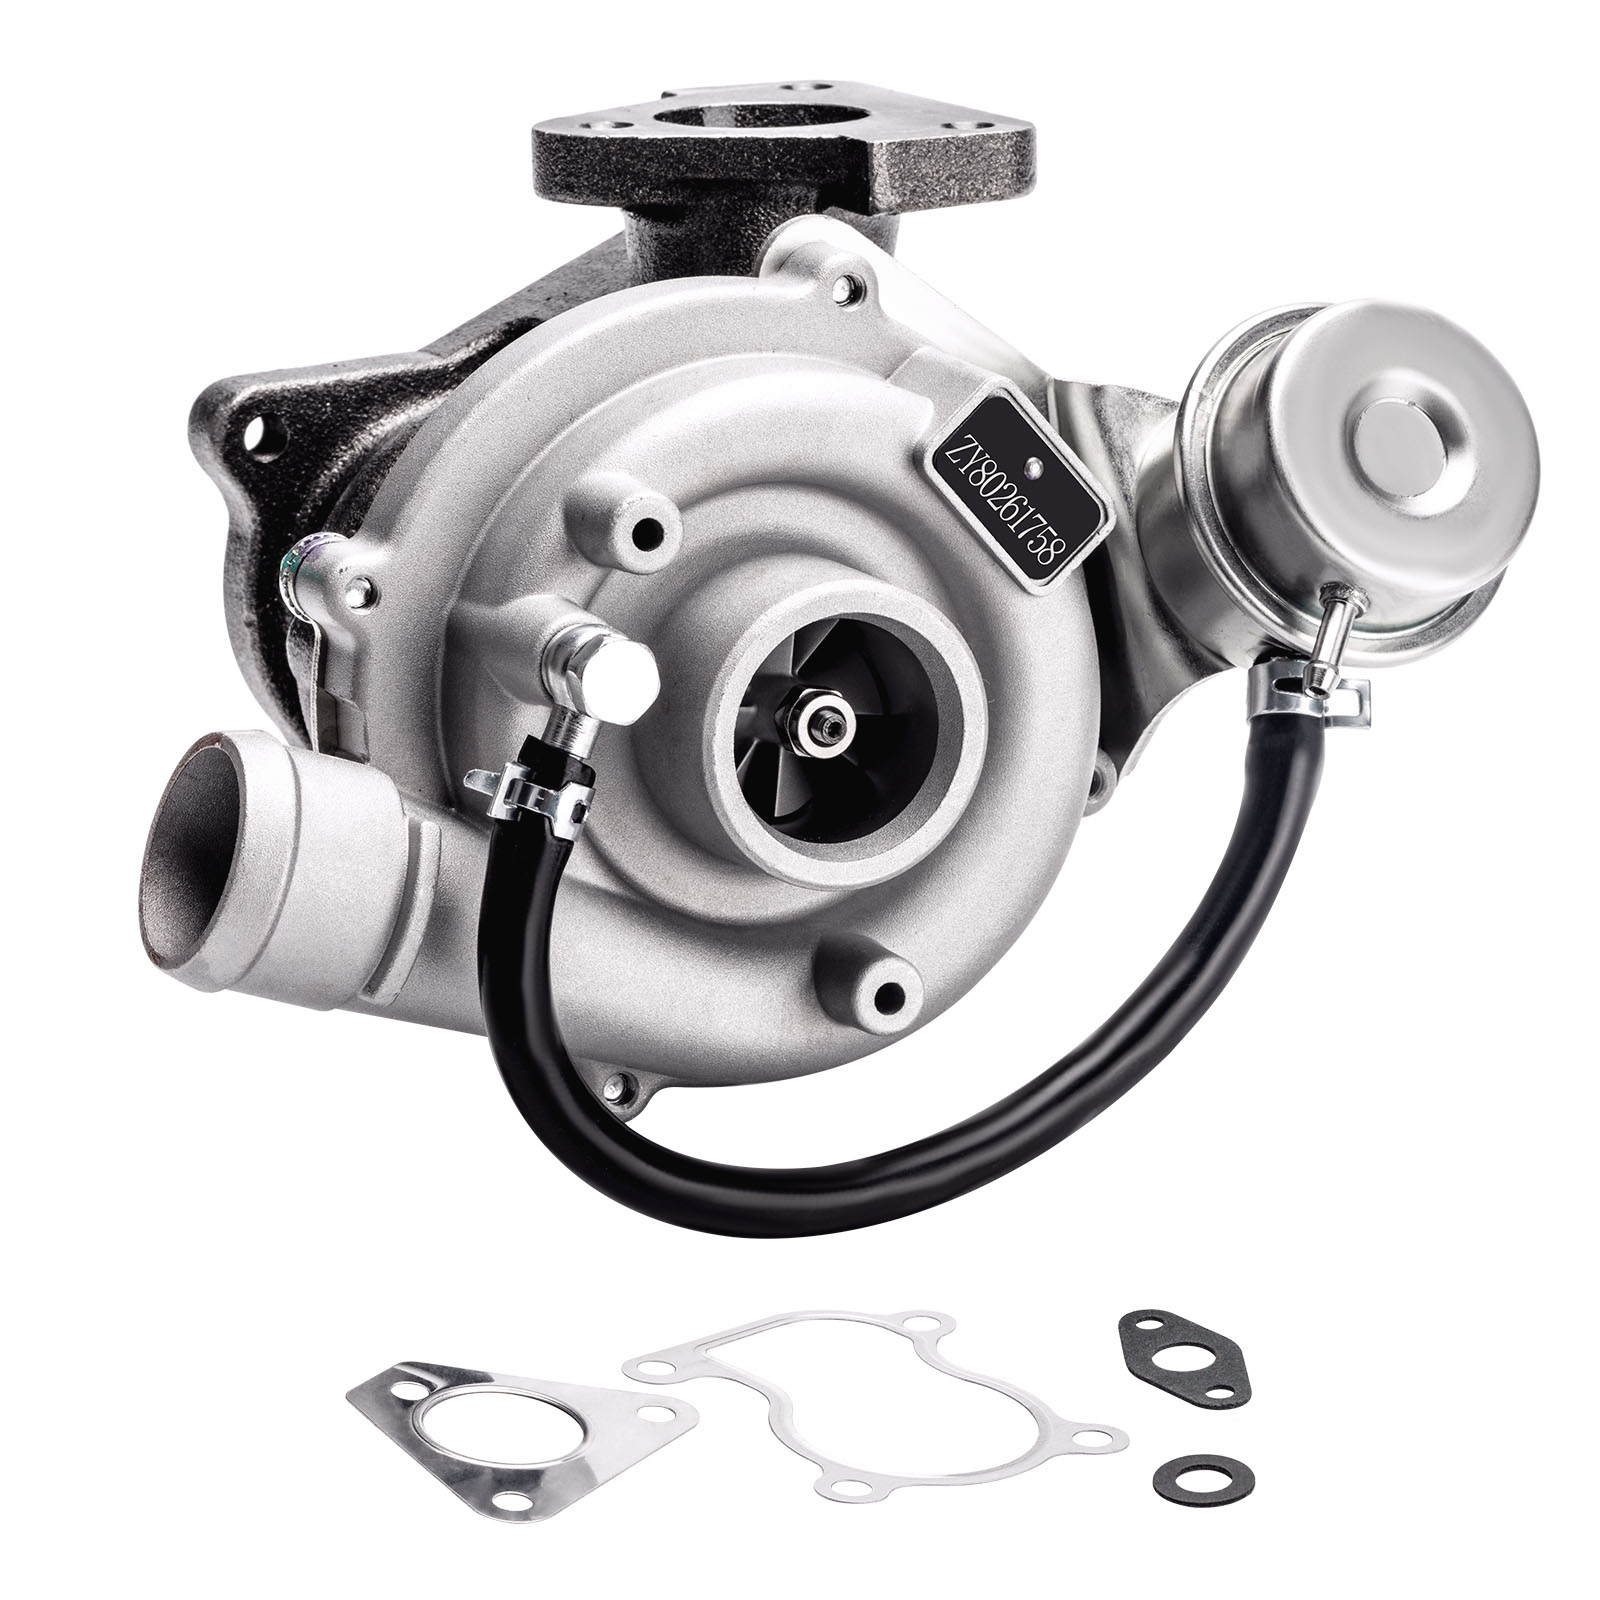 Turbolader turbocharger for VW GOLF III 1.9 TD,GTD 55 kW (75 PS)